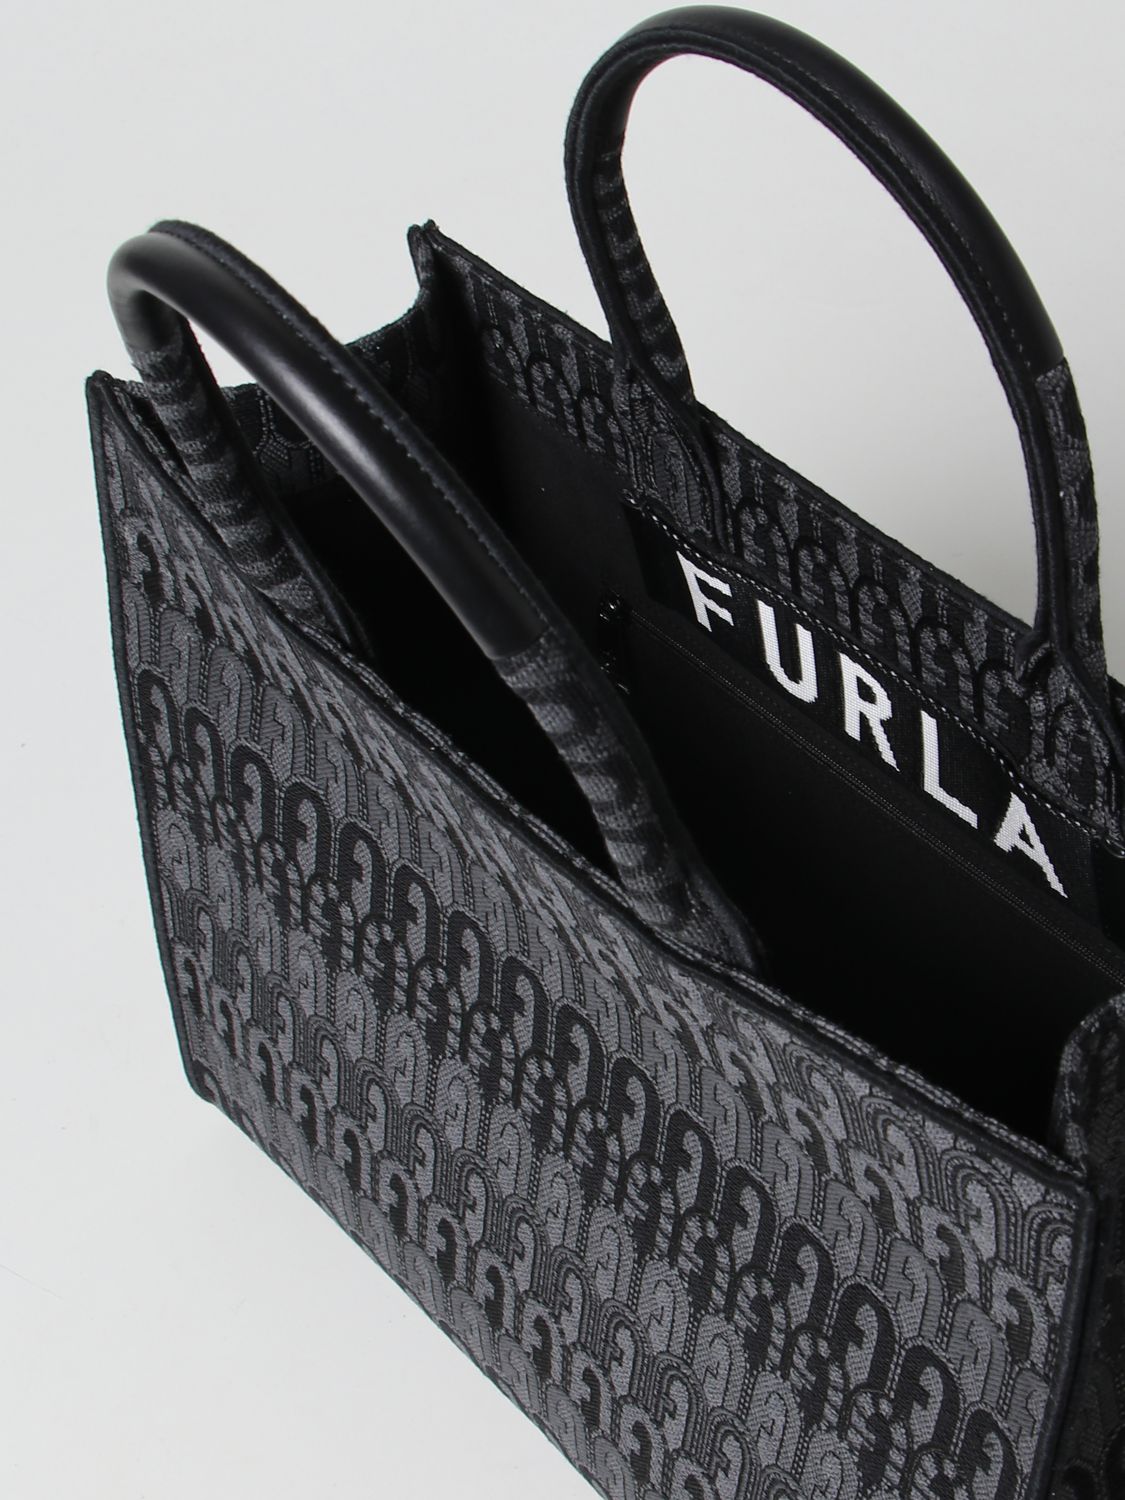 Furla Opportunity - Tote bag for Woman - Black - WB00255A0459-GREIGE